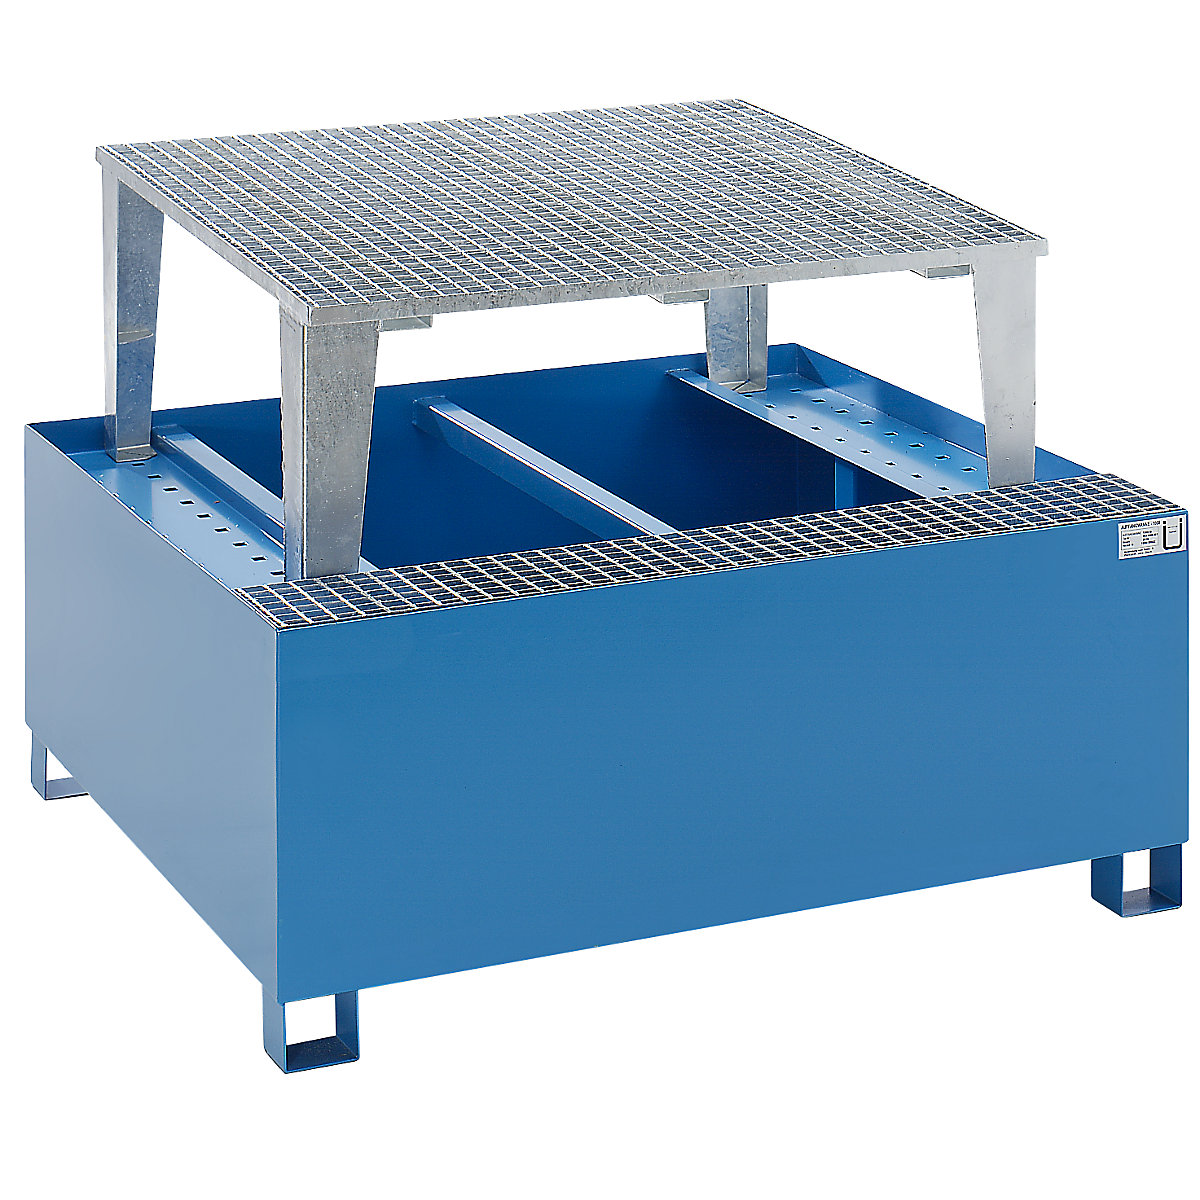 Steel sump tray for IBC/CTC tank containers – eurokraft basic